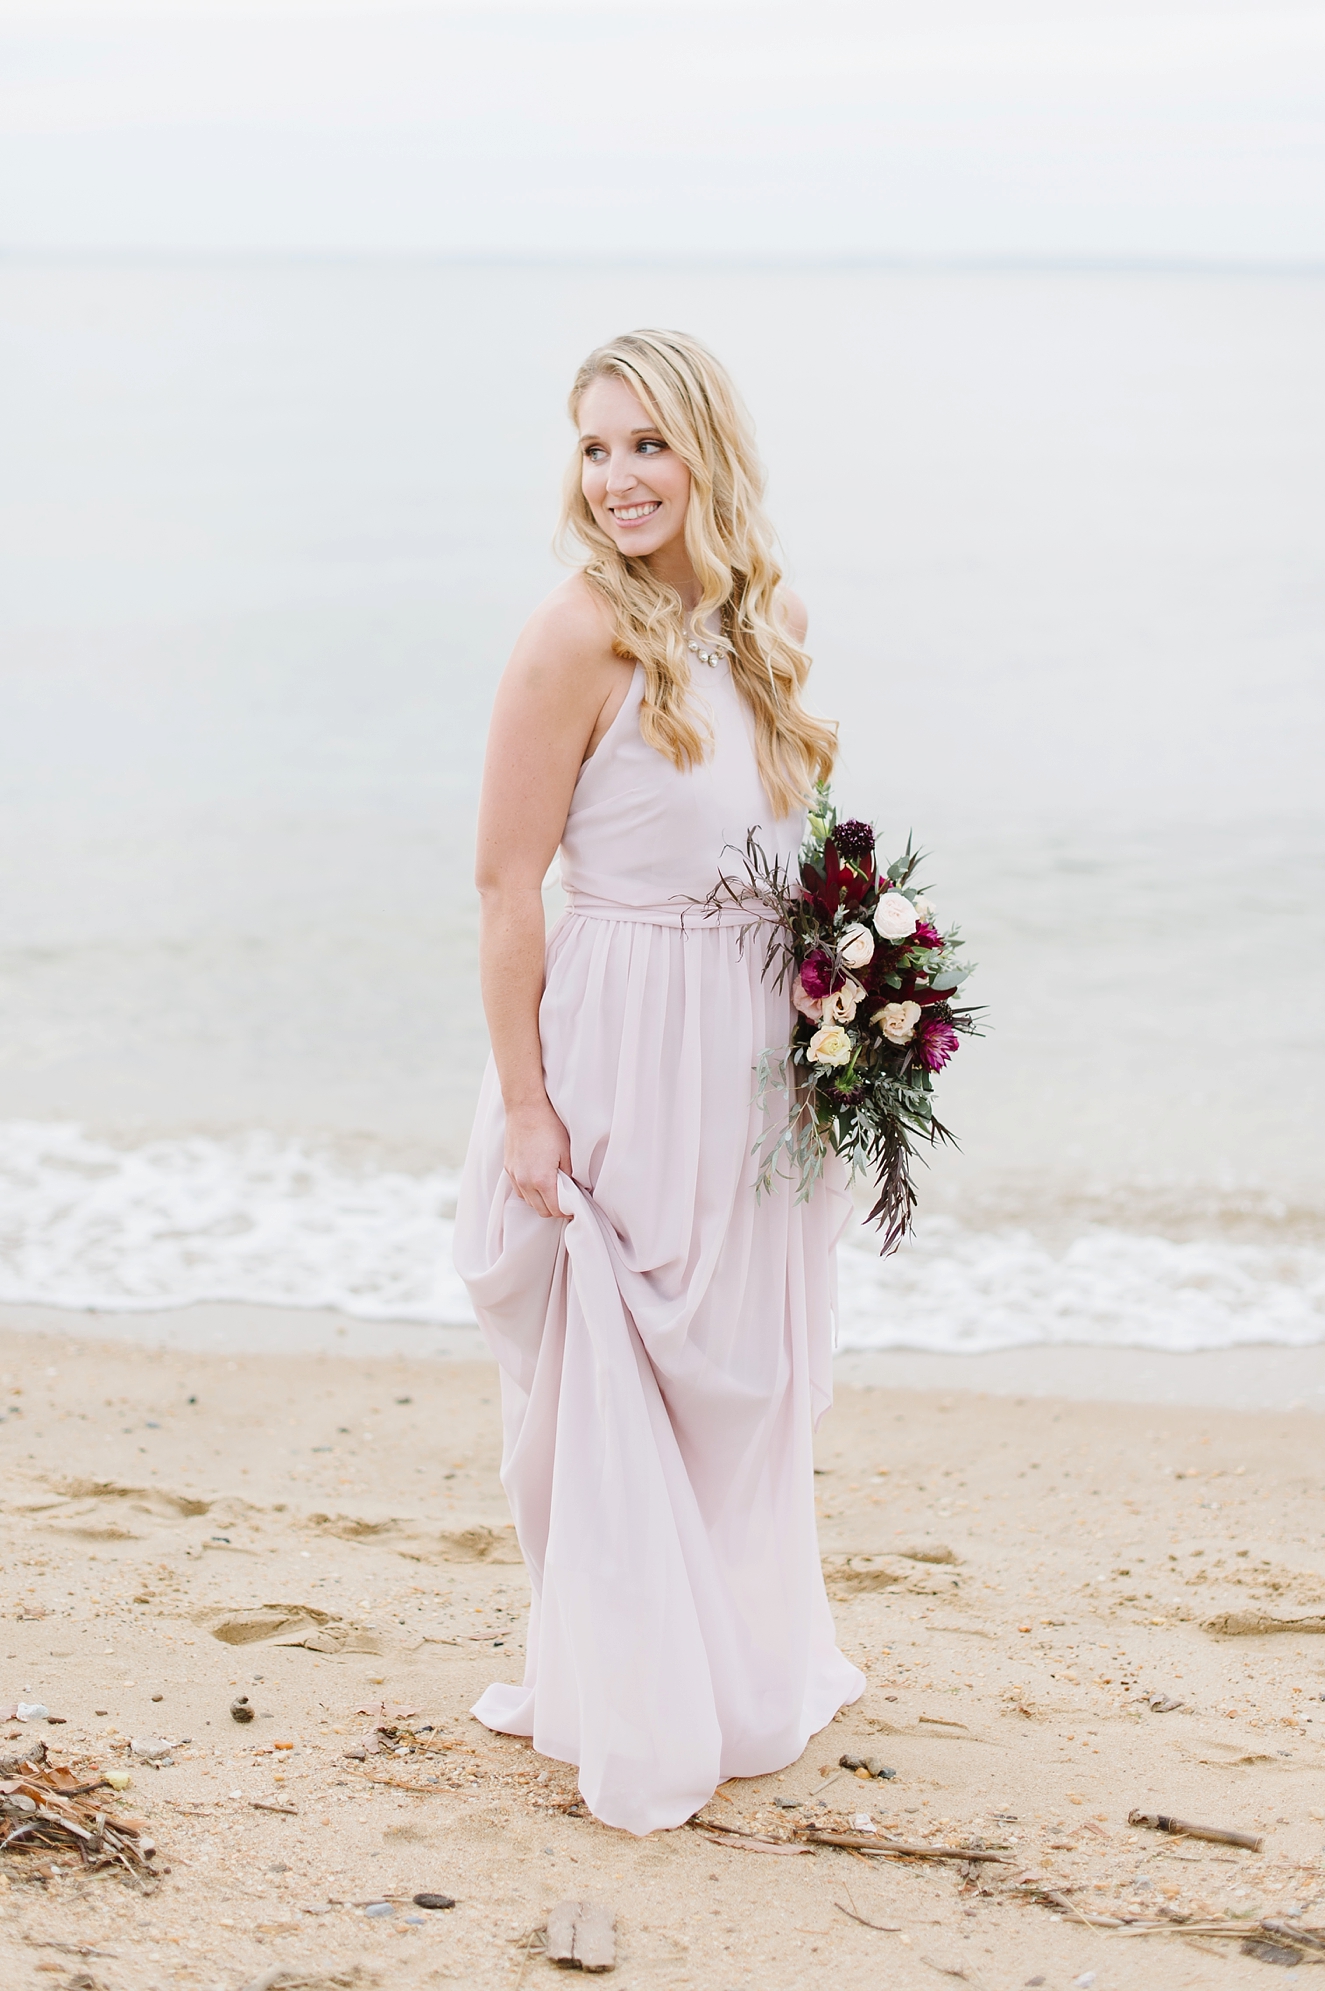 Donna Morgan Lavender Dress with Autumn Bouquet by Natalie Franke Photography